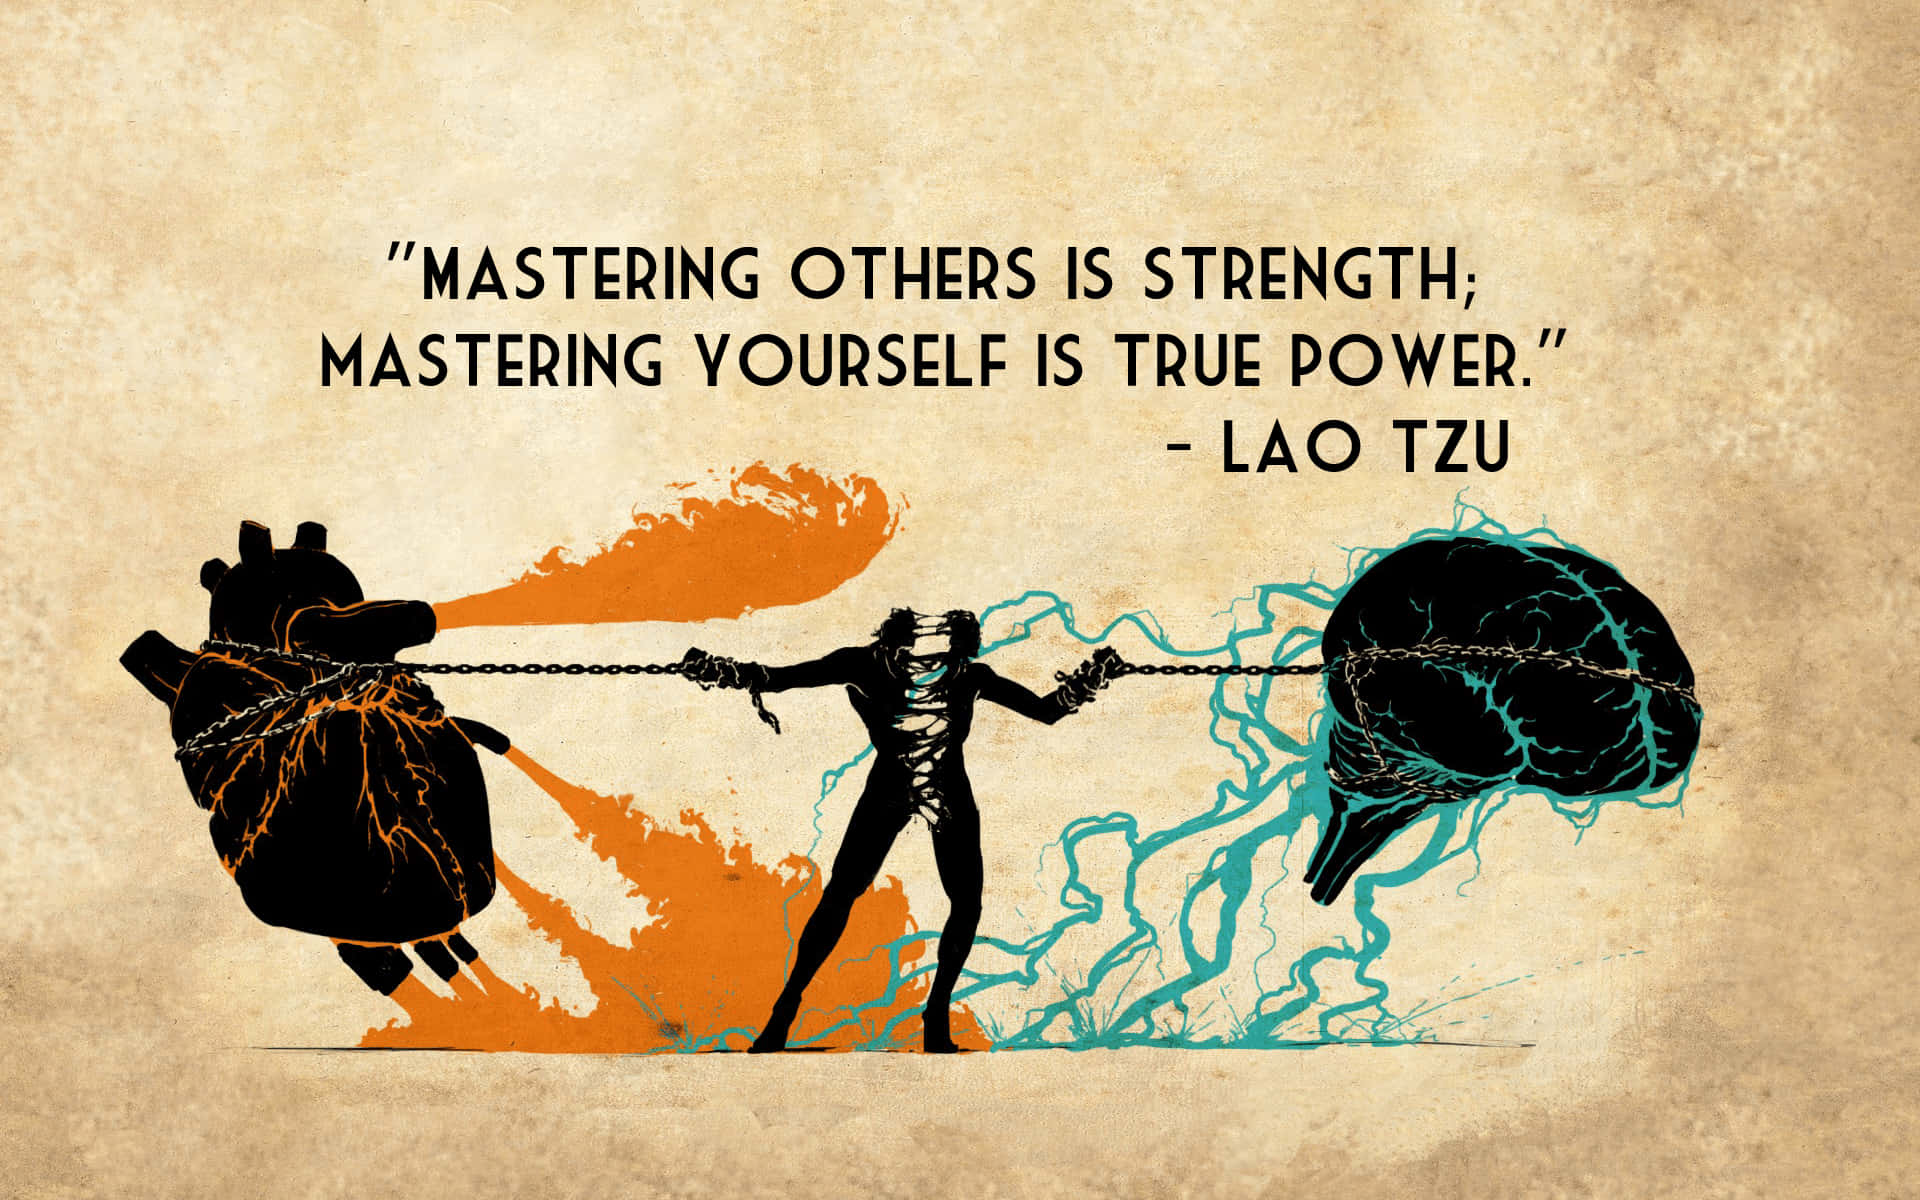 Lao Tzu - Mastering Others Is Strength Mastering Yourself Is True Power Wallpaper